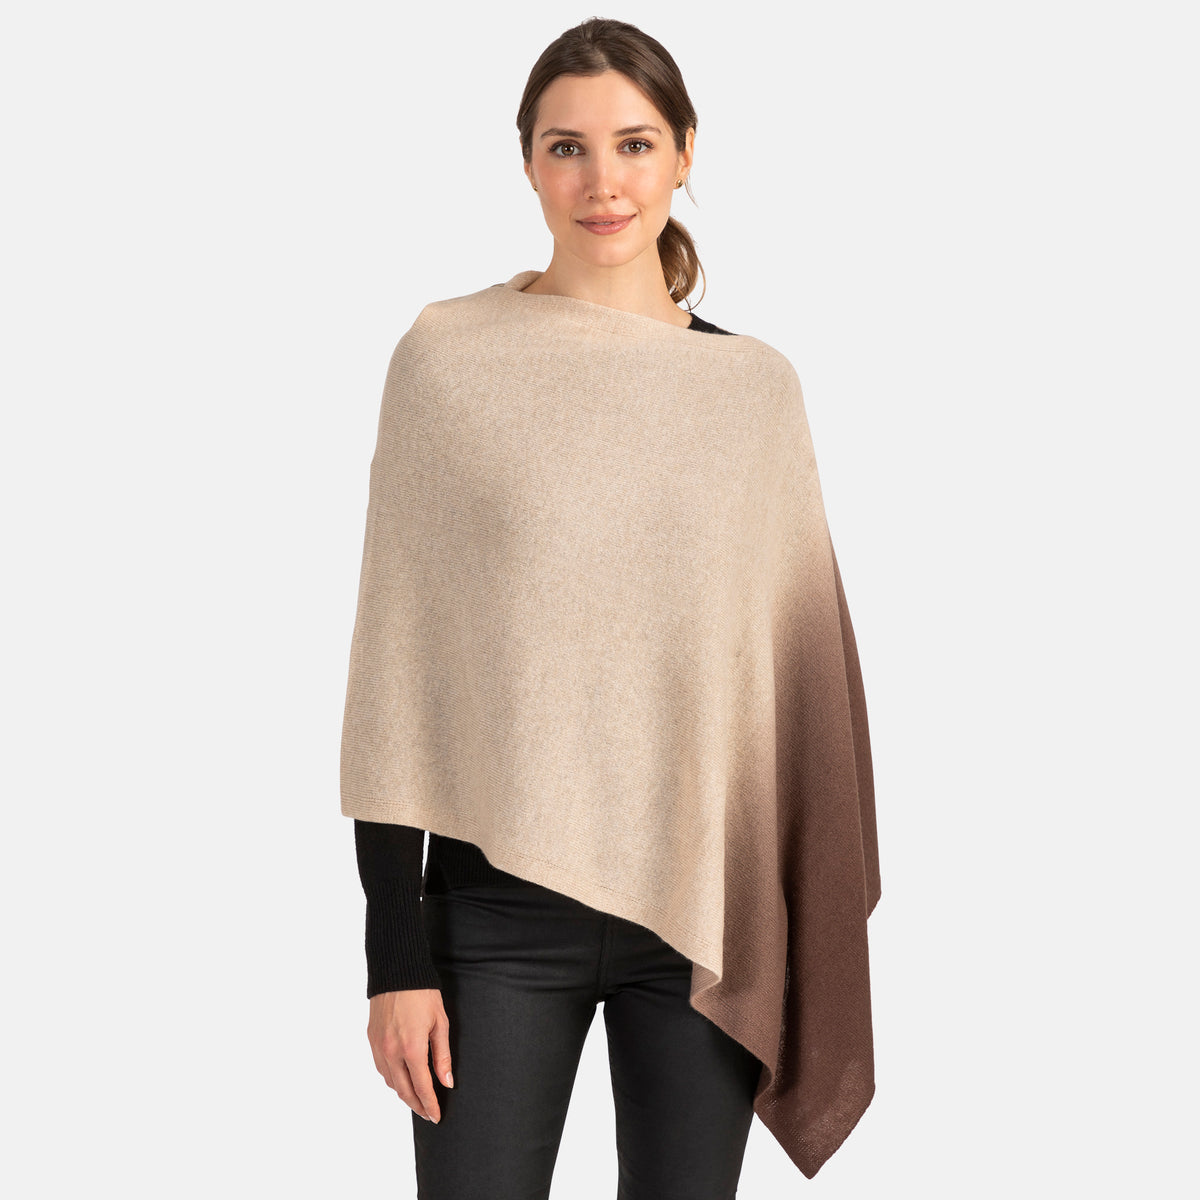 Picture of a woman wearing an assymetrical cashmere knit over the head poncho with dip dye patter in grey and black.